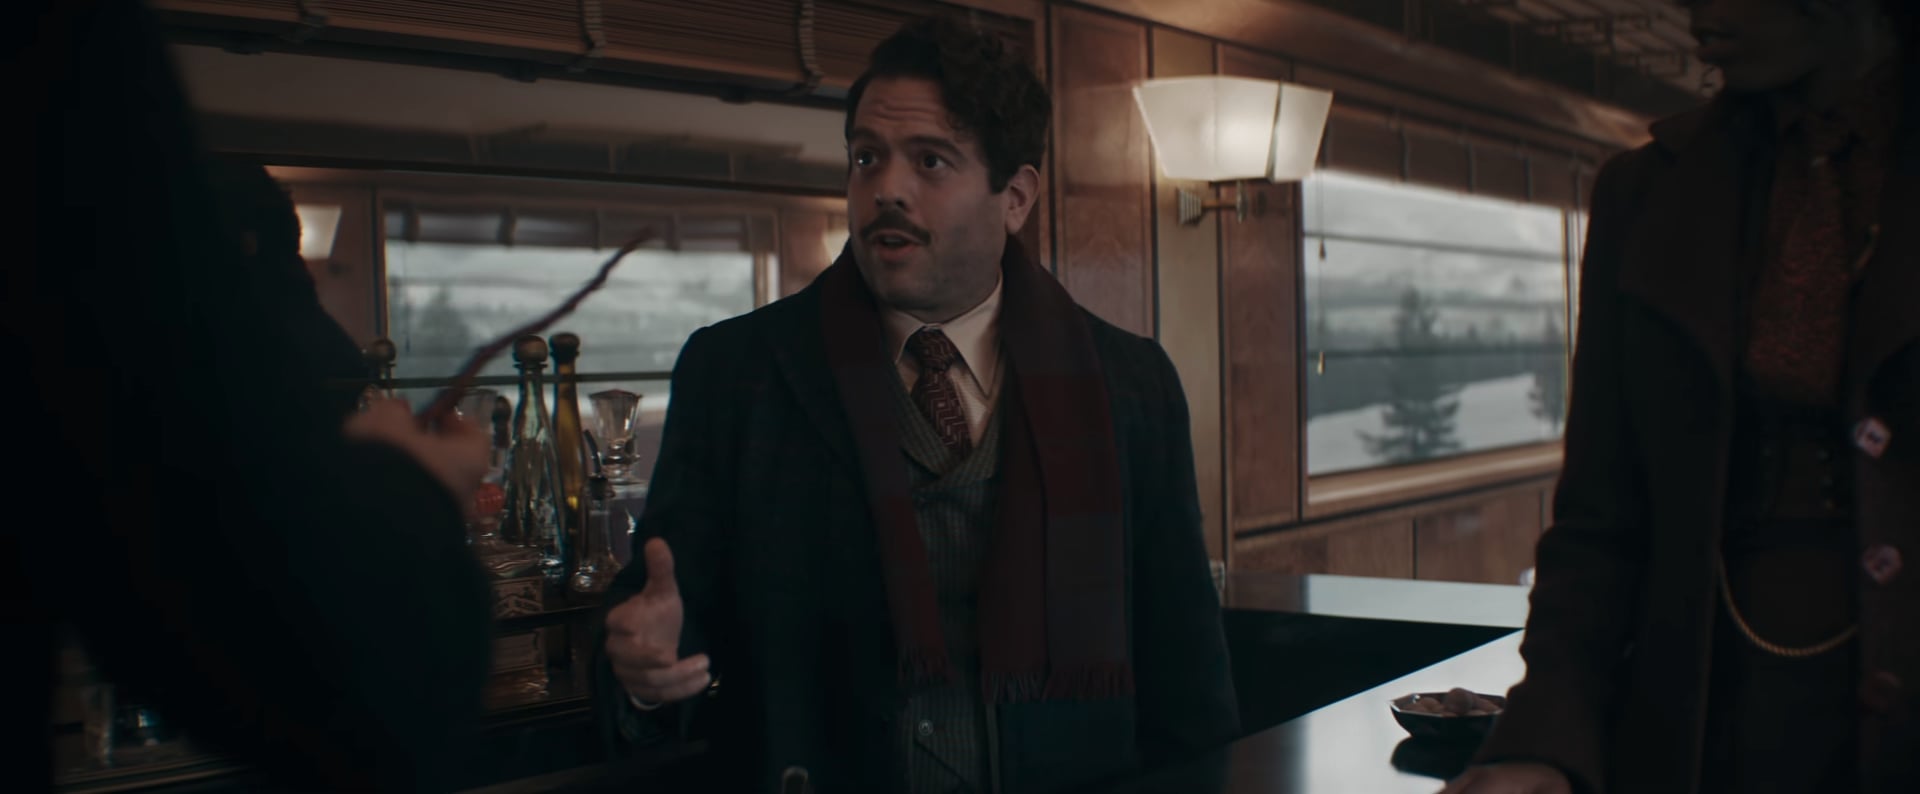 Fantastic Beasts 3: Why Did Dumbledore Give Jacob a Wand? | POPSUGAR Entertainment